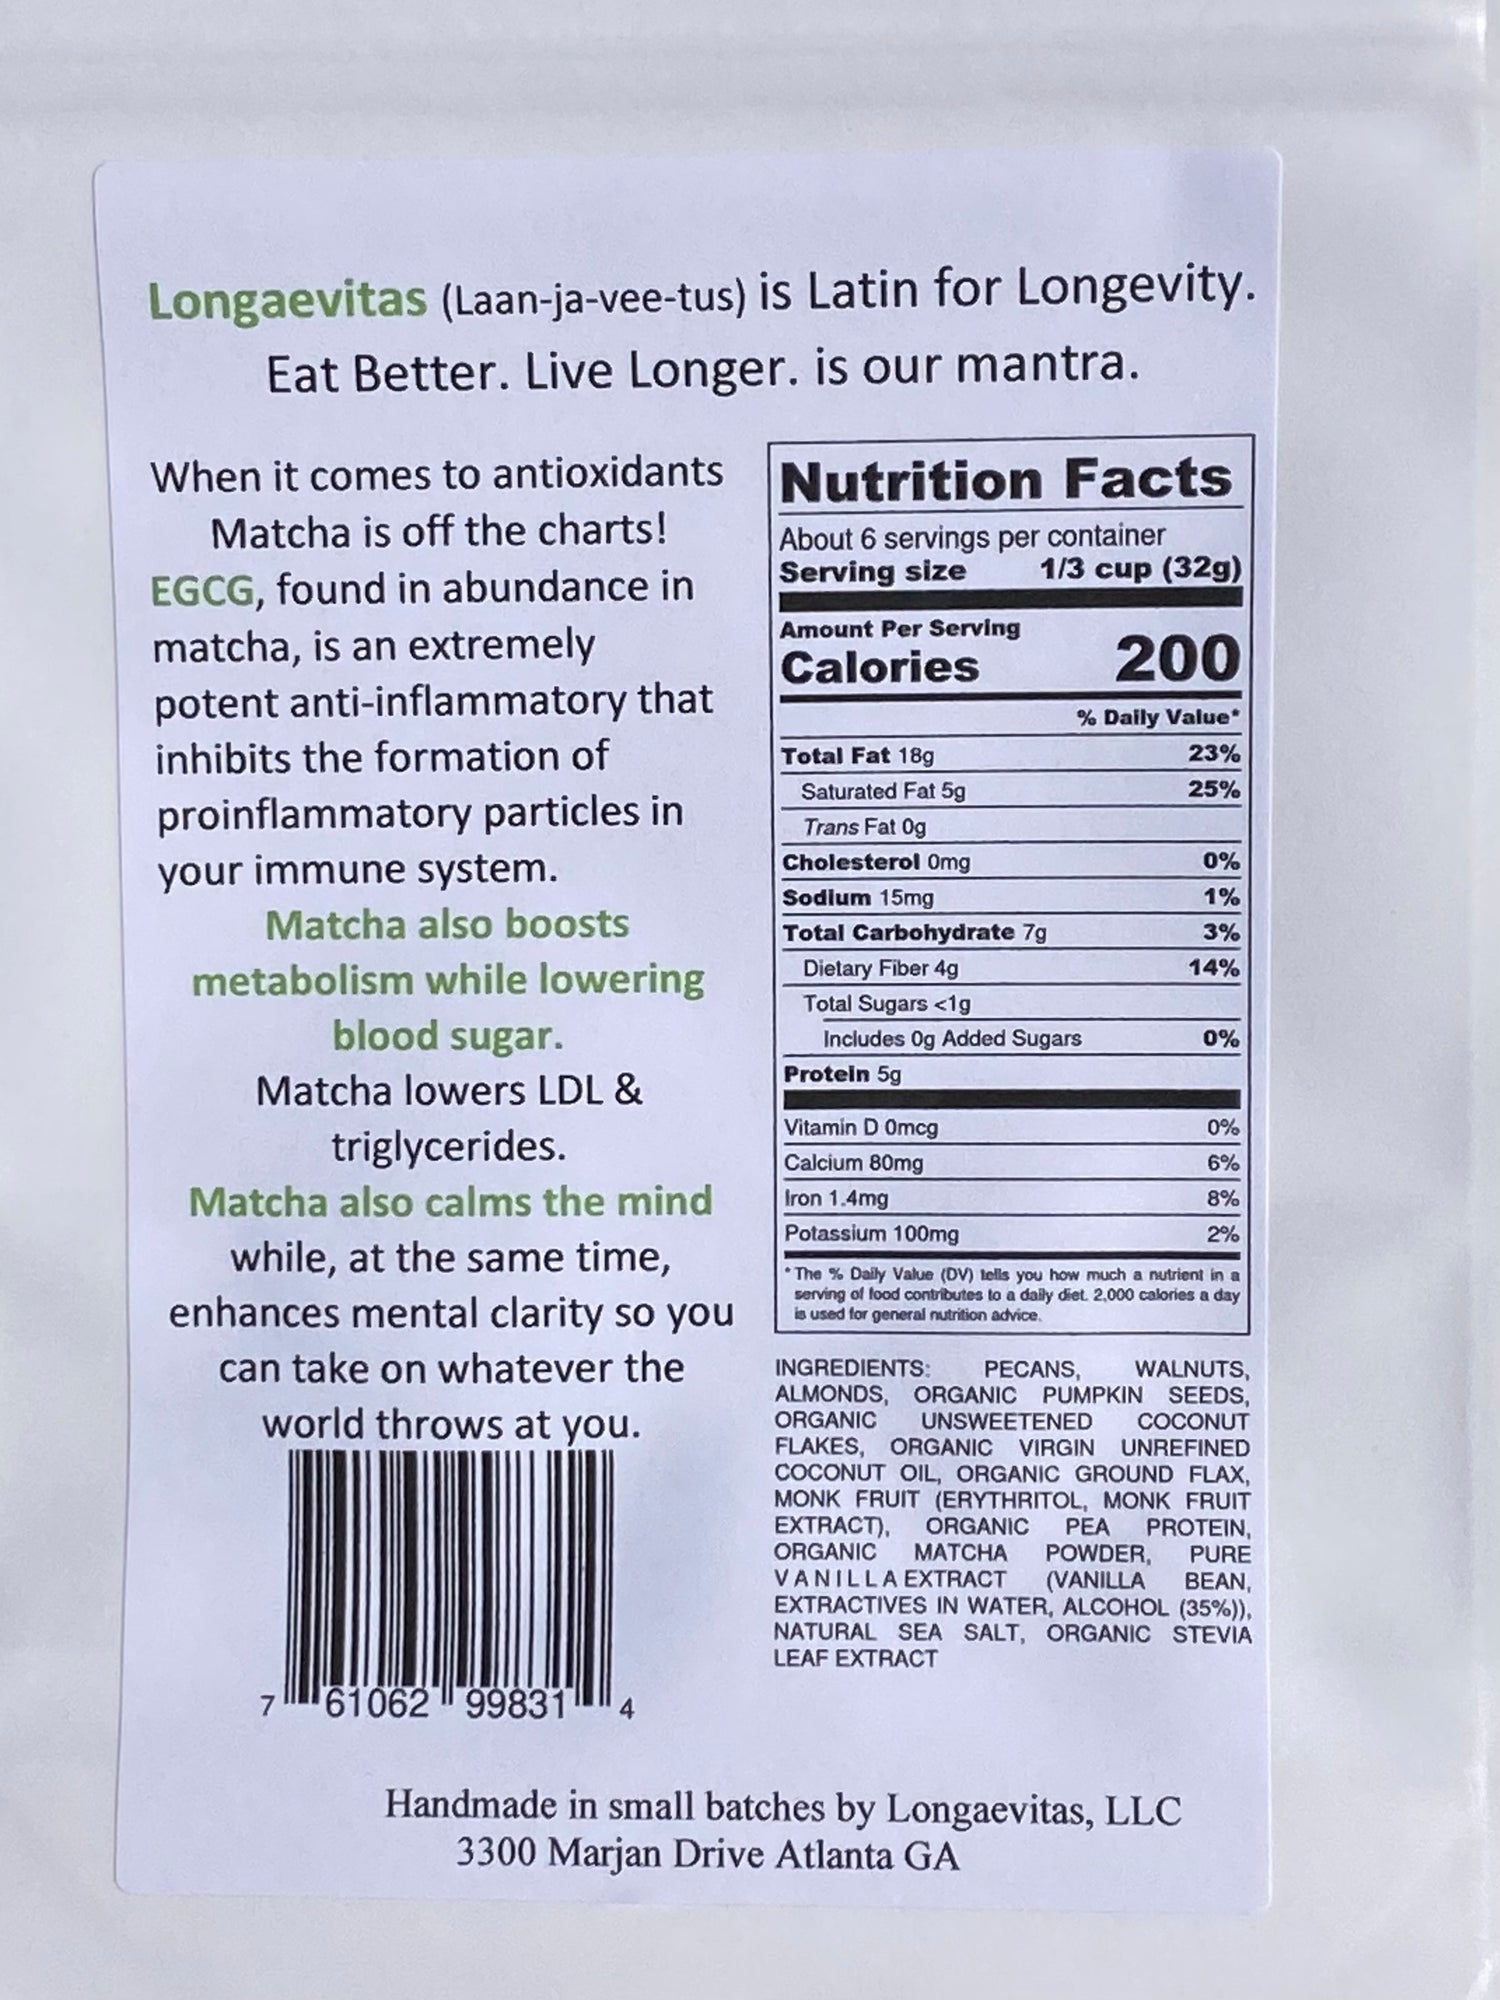 Longaevitas MATCHA Granola package back panel including Nutrition Facts and Ingredients